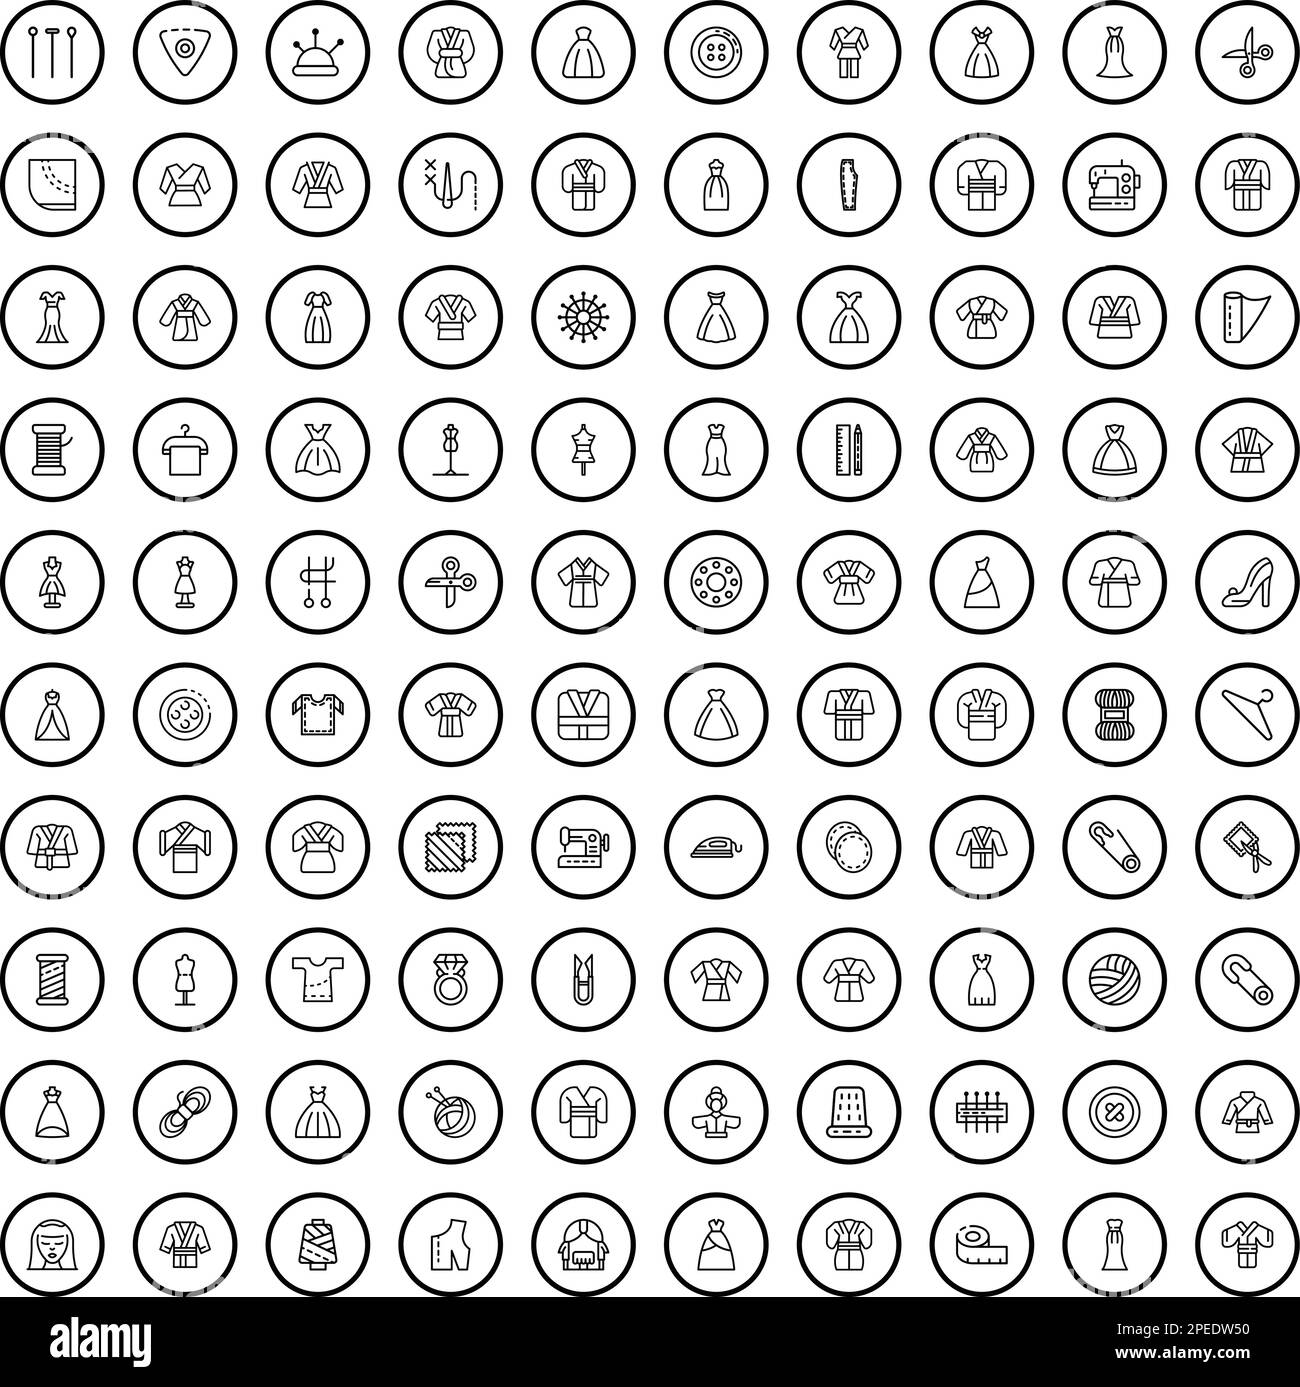 100 dress icons set. Outline illustration of 100 dress icons vector set isolated on white background Stock Vector